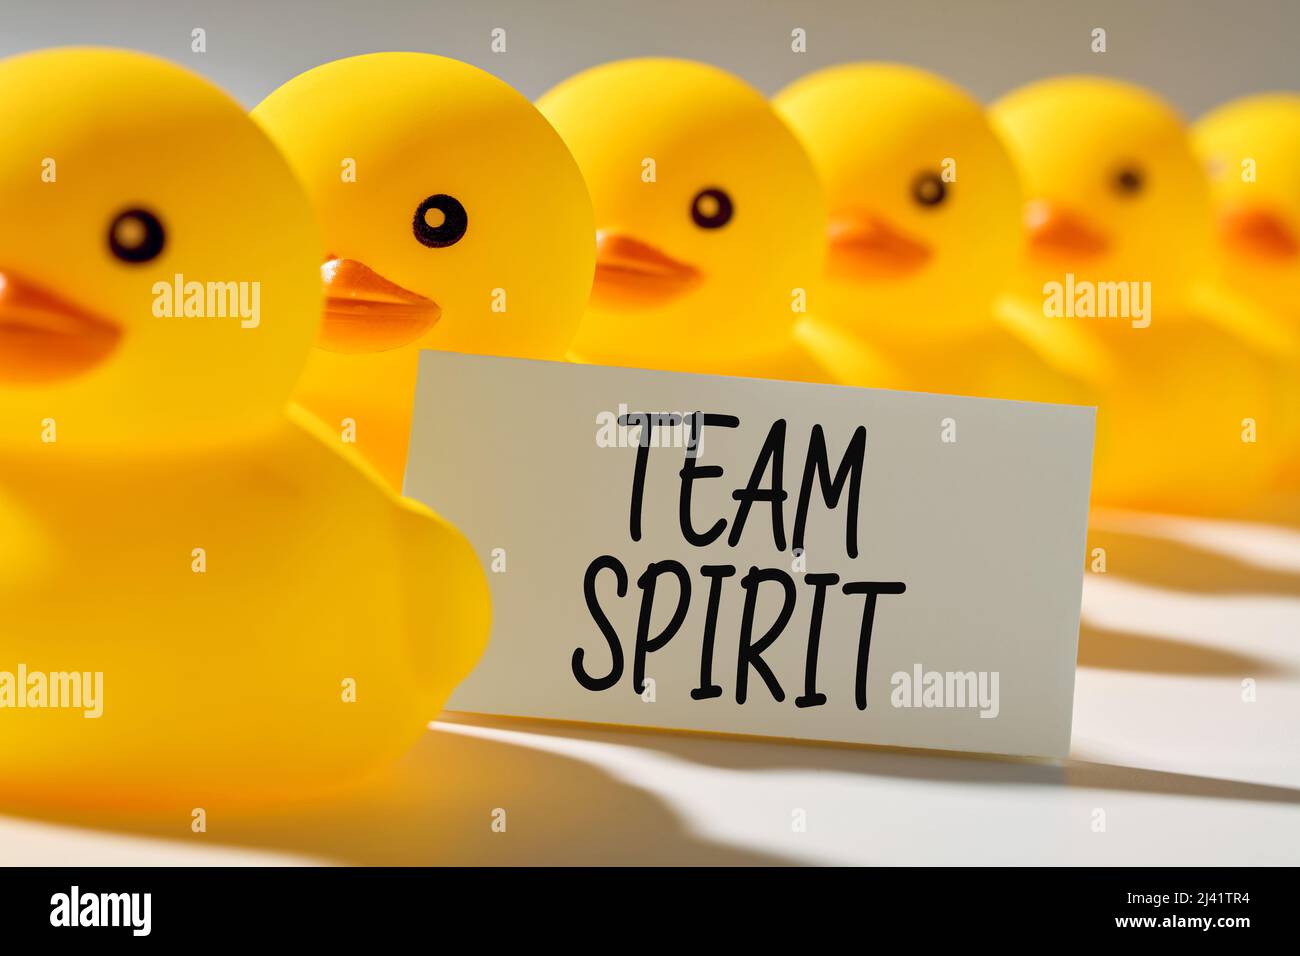 Teamwork, cooperation or collaboration in business concept. Rubber ducks in a row carry a signboard with the word team spirit. Stock Photo